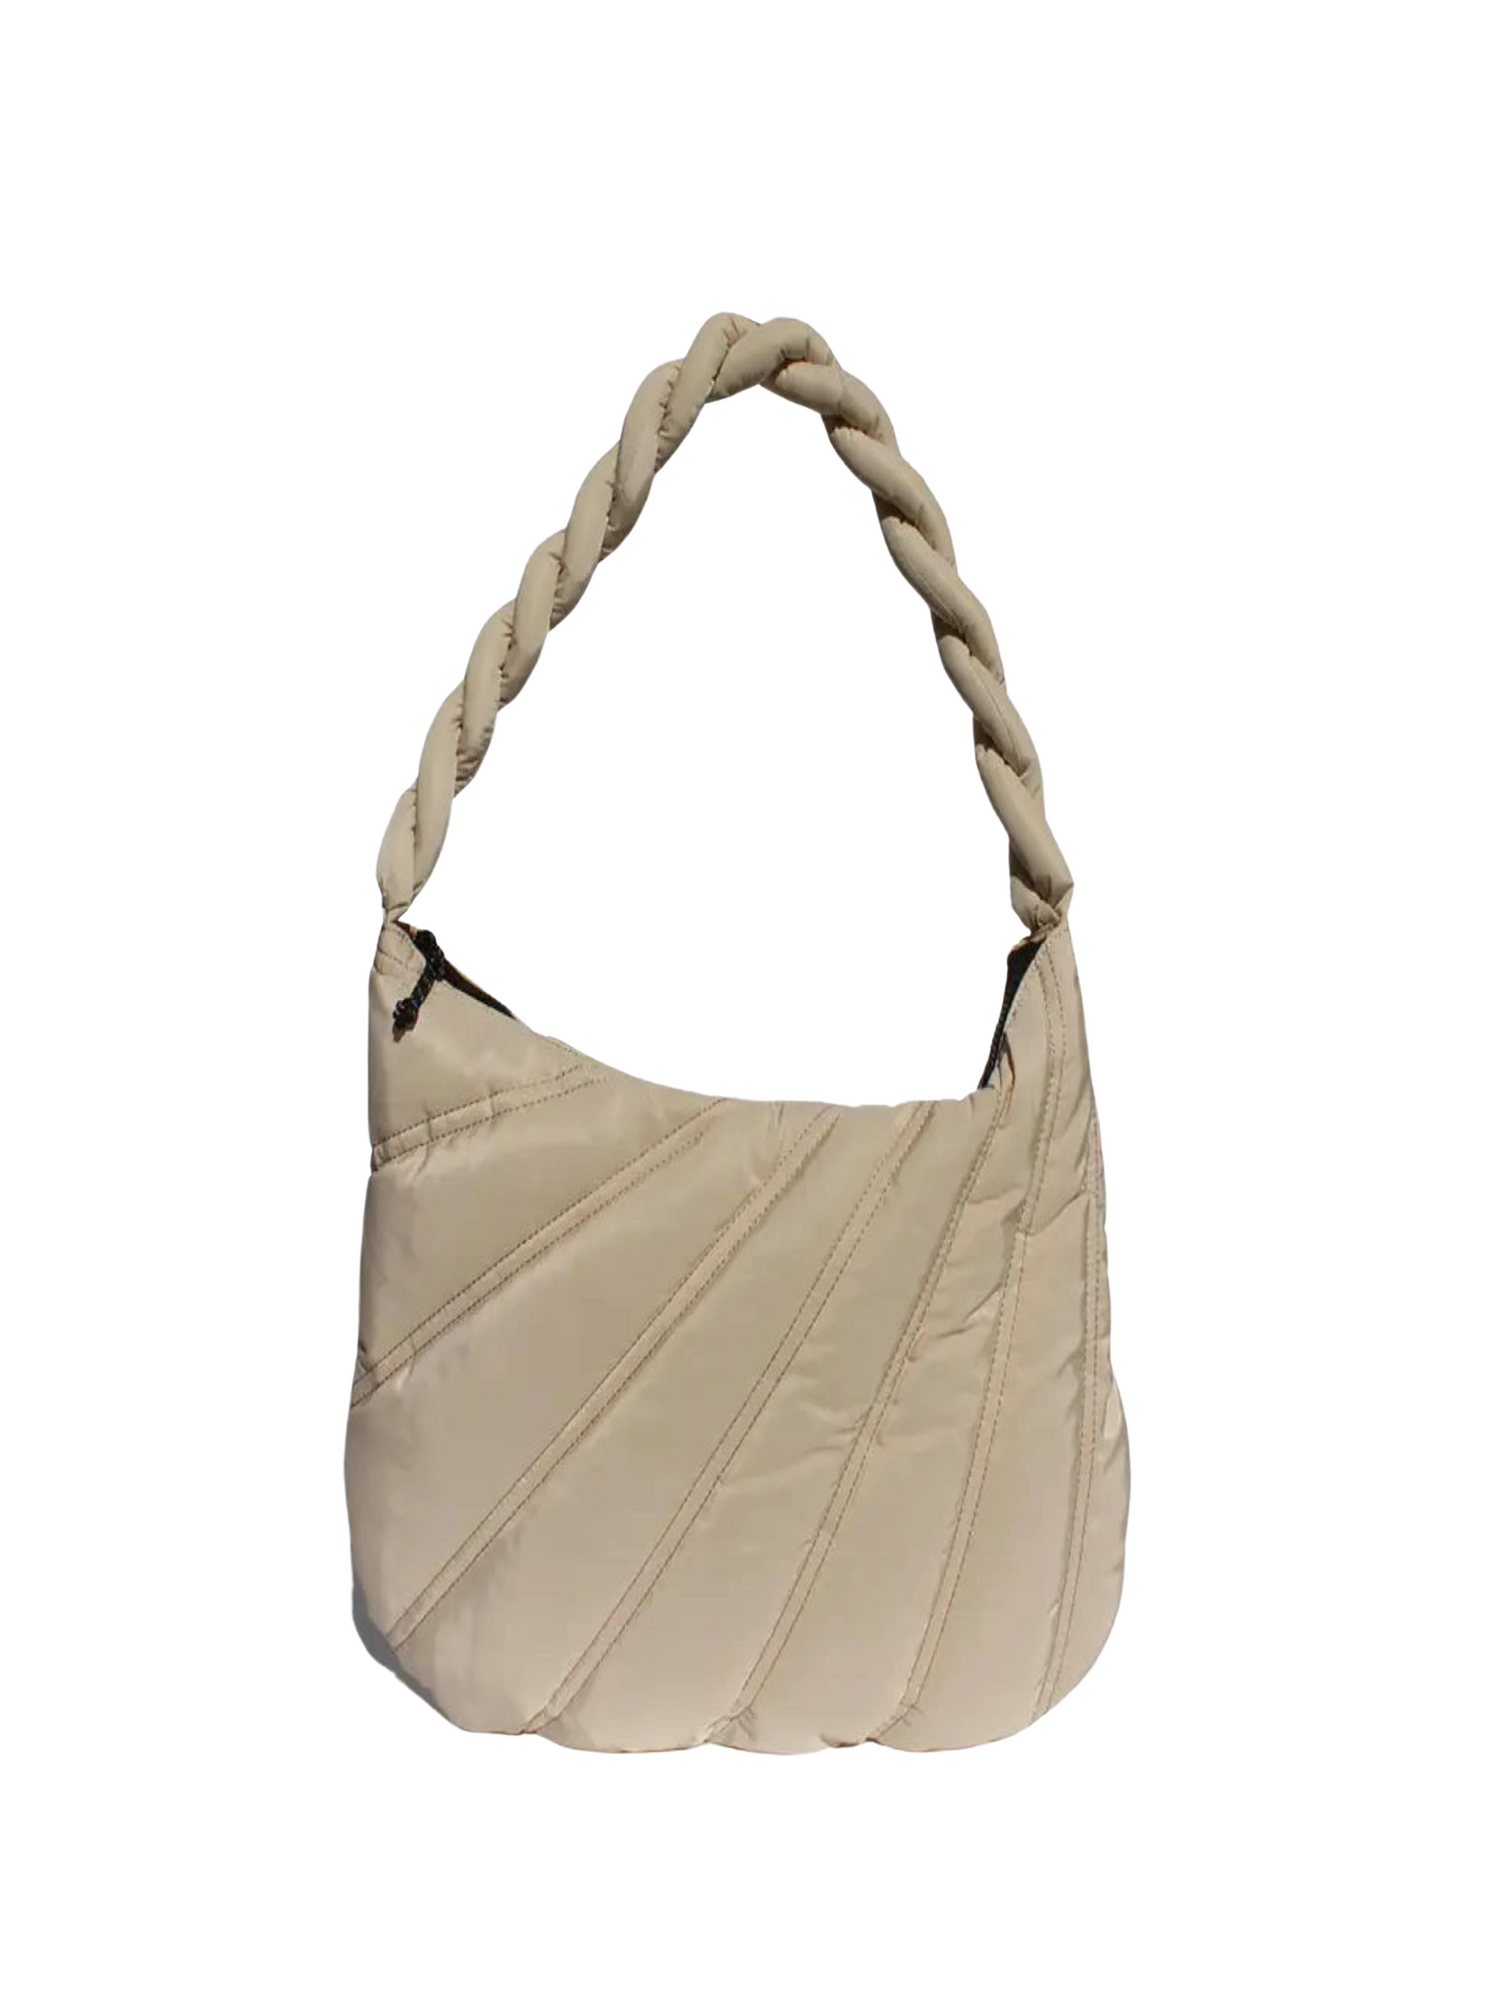 FUN NEUTRAL QUILTED TOTE BAG - THE HIP EAGLE BOUTIQUE